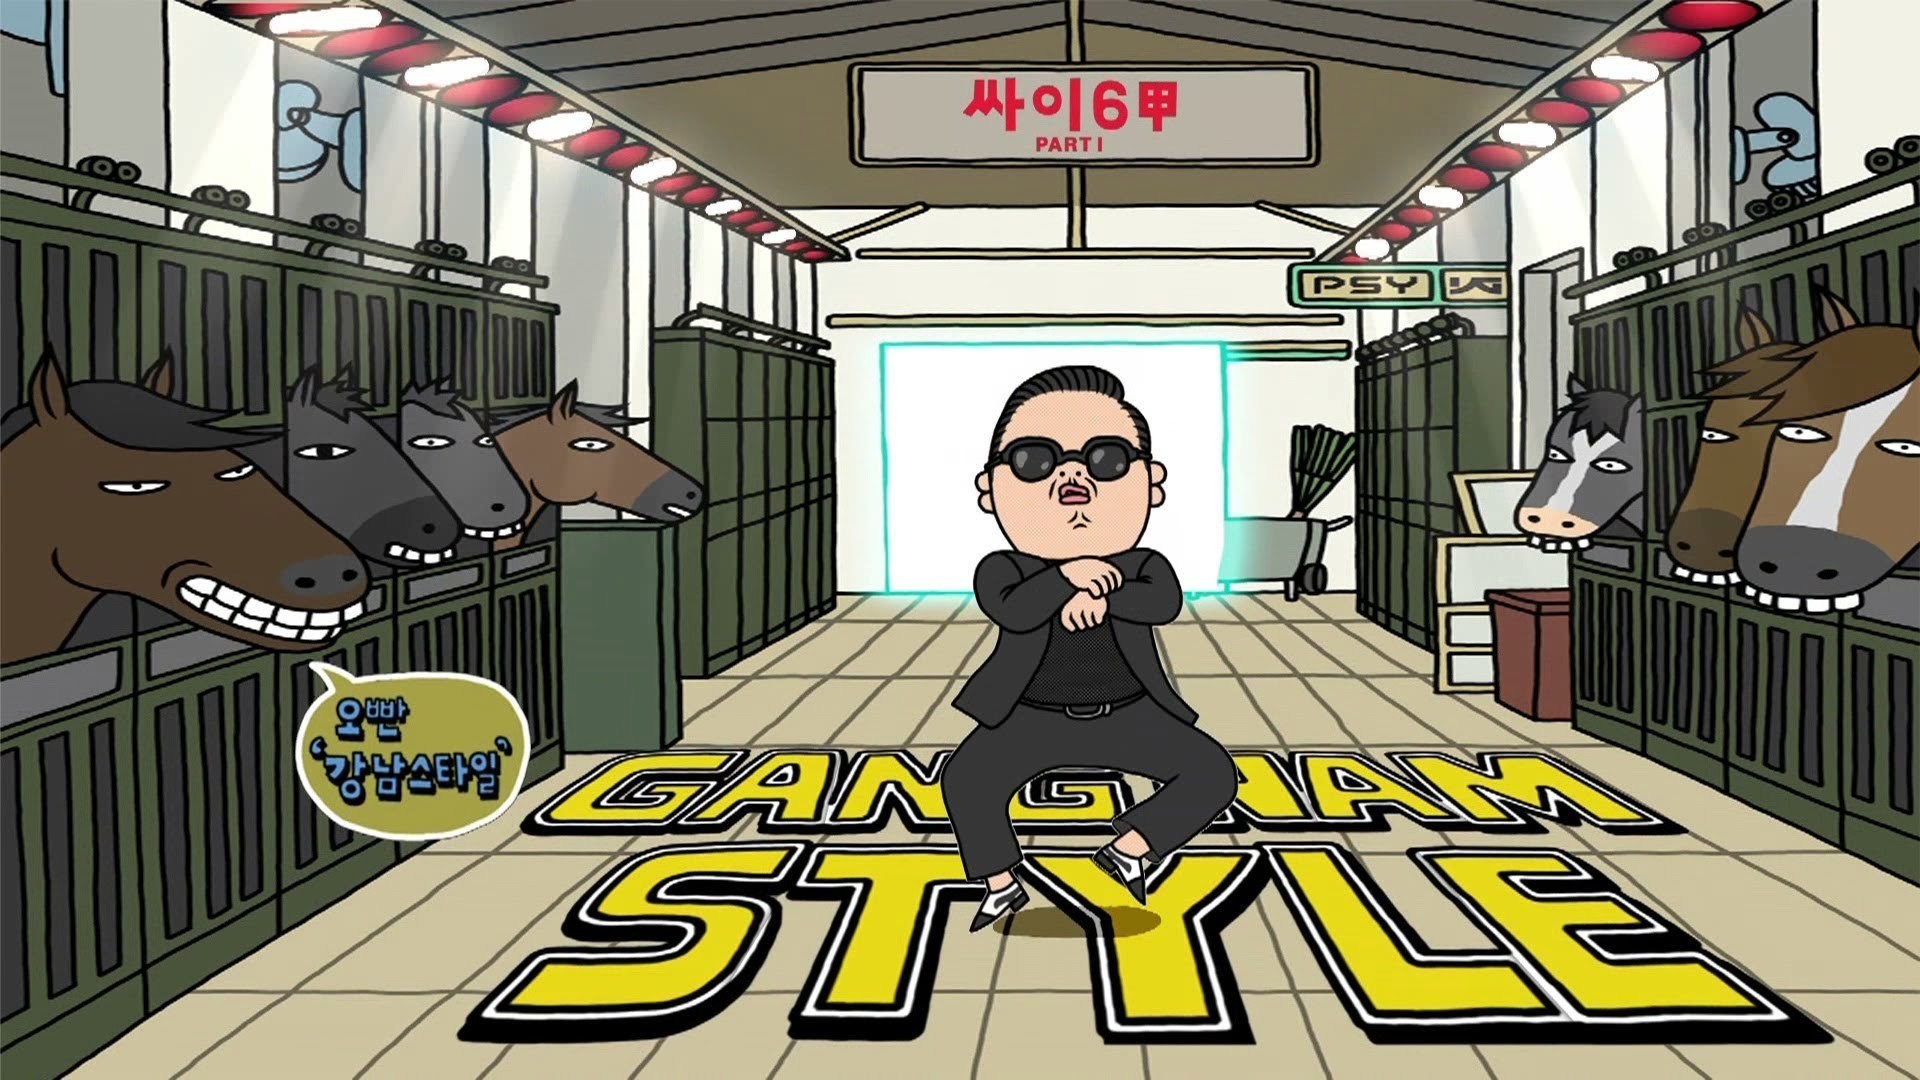 The music video "Gangnam Style" is the most viewed video on YouTube, breaking the site's counter.
YouTube had to upgrade its counter to keep up with the number of people watching the video. As of September 2016, it has over 2.64 billion views.